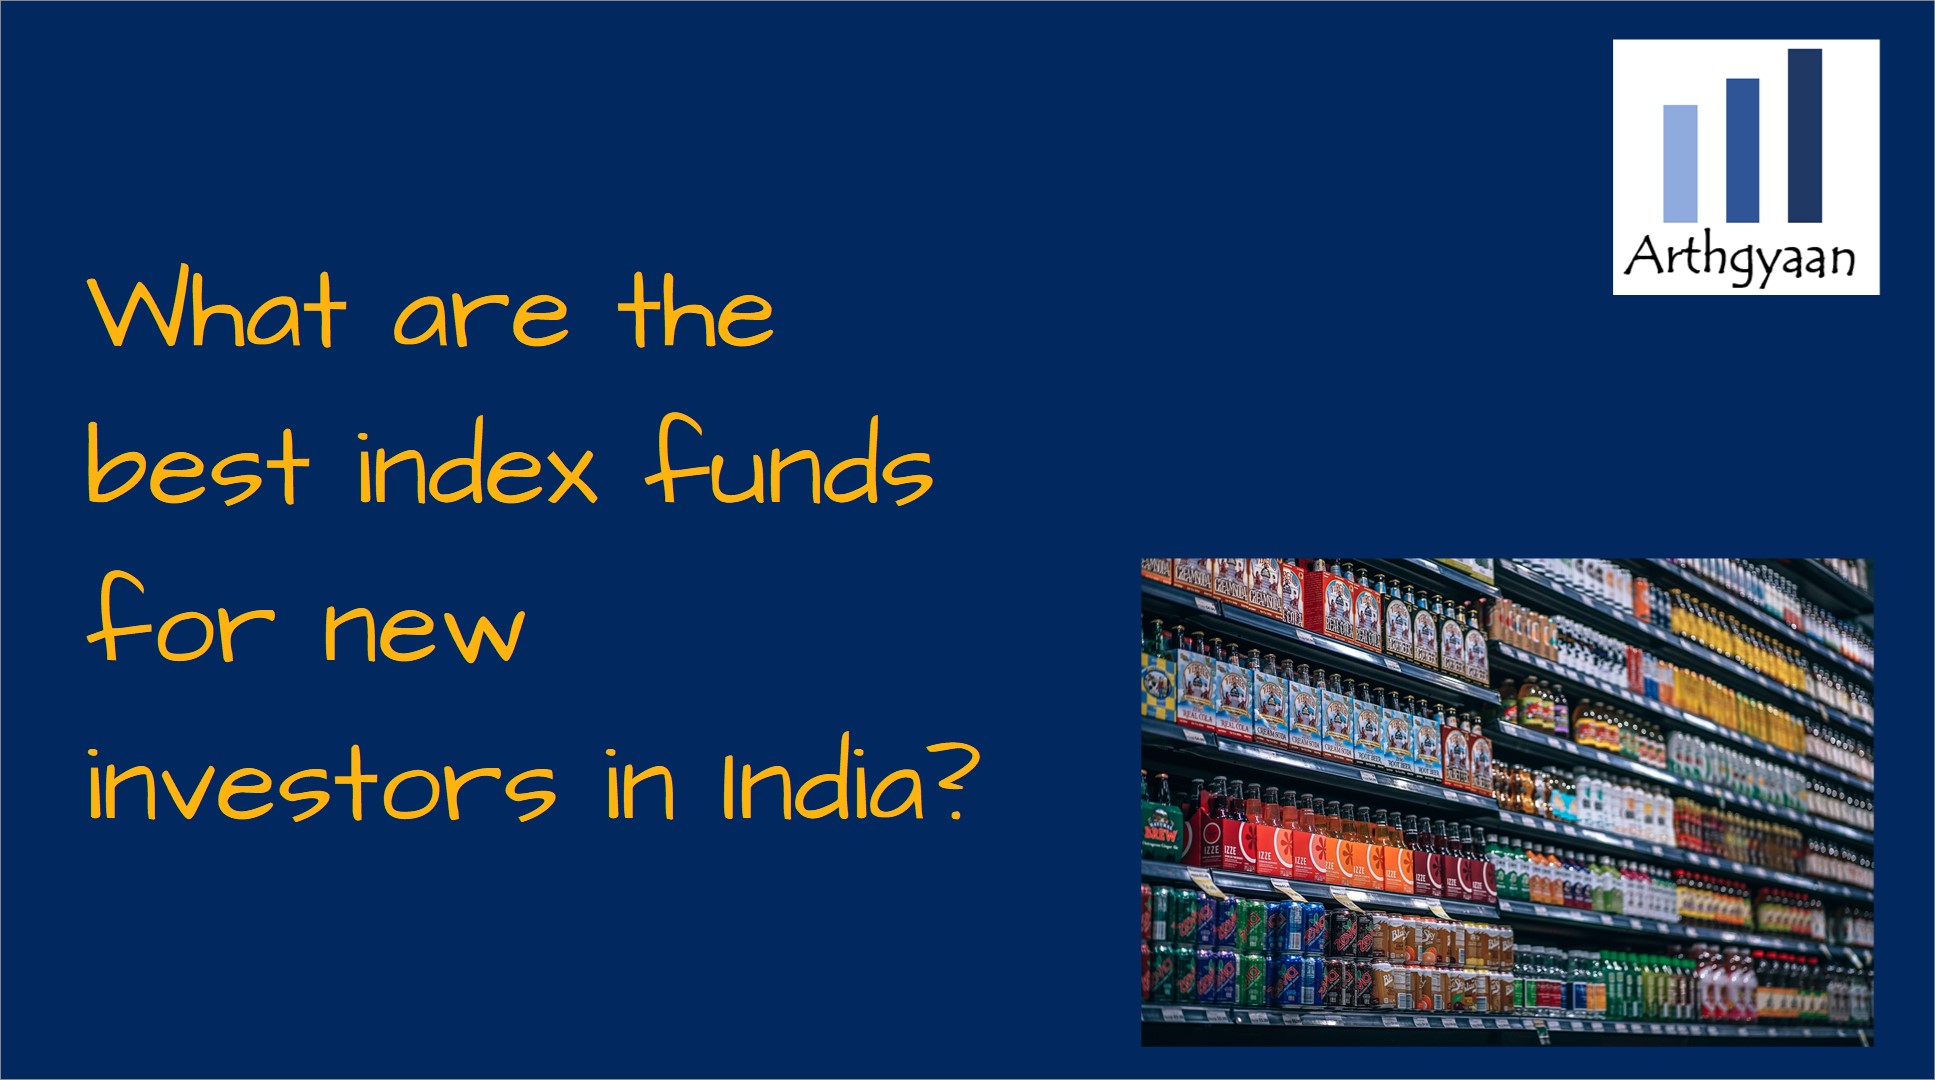 What are the best index funds for new investors in India?